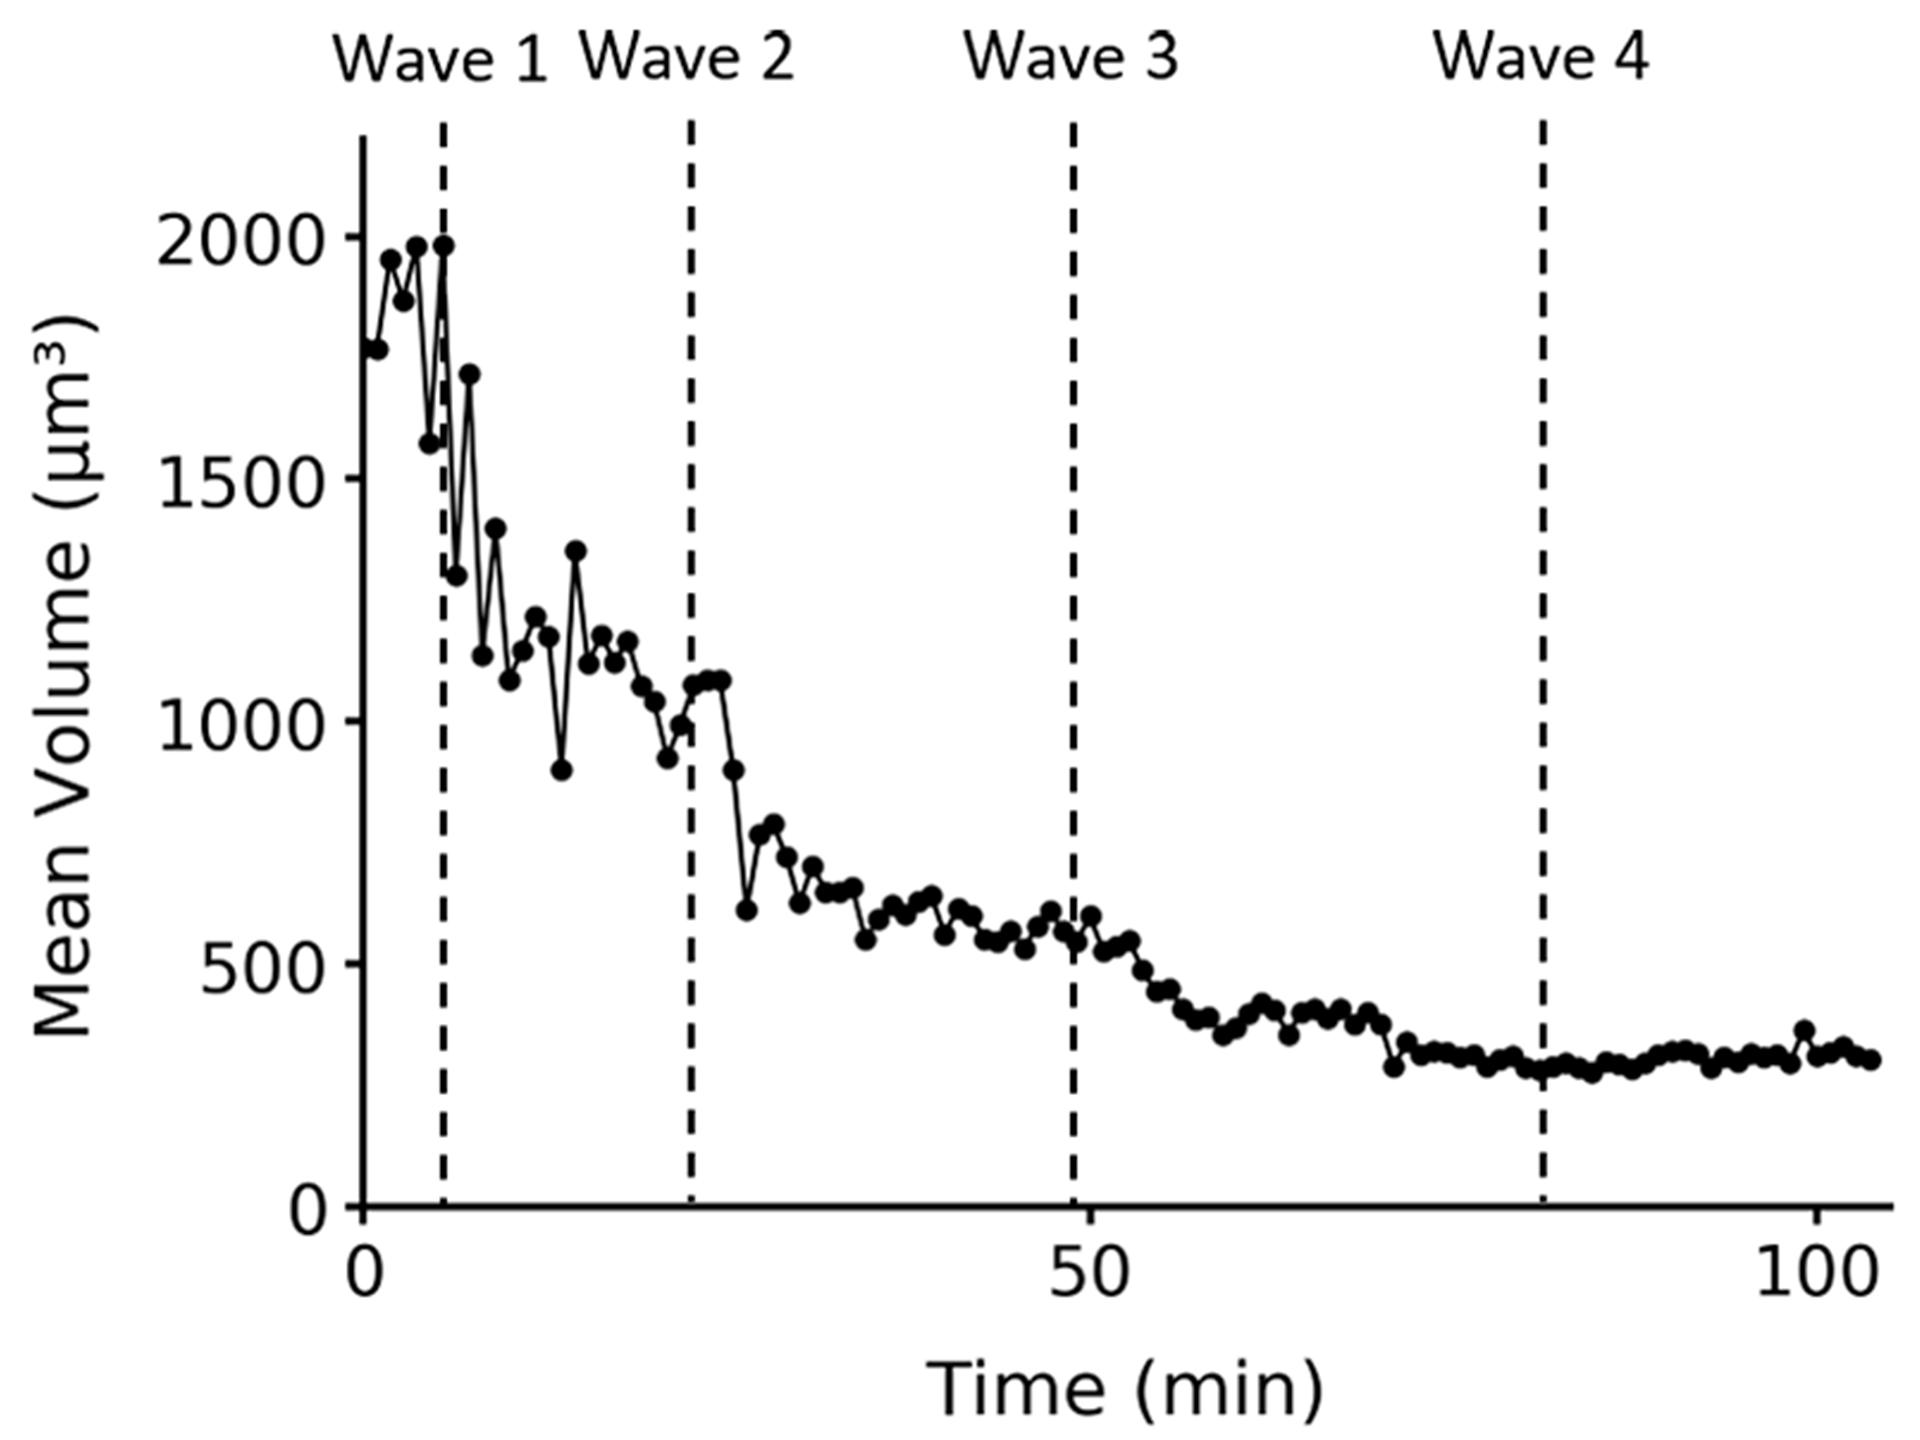 Figure 5B: Cell compartment volume. Volumes are averaged for each time point. Vertical lines indicate peak mitotic waves.